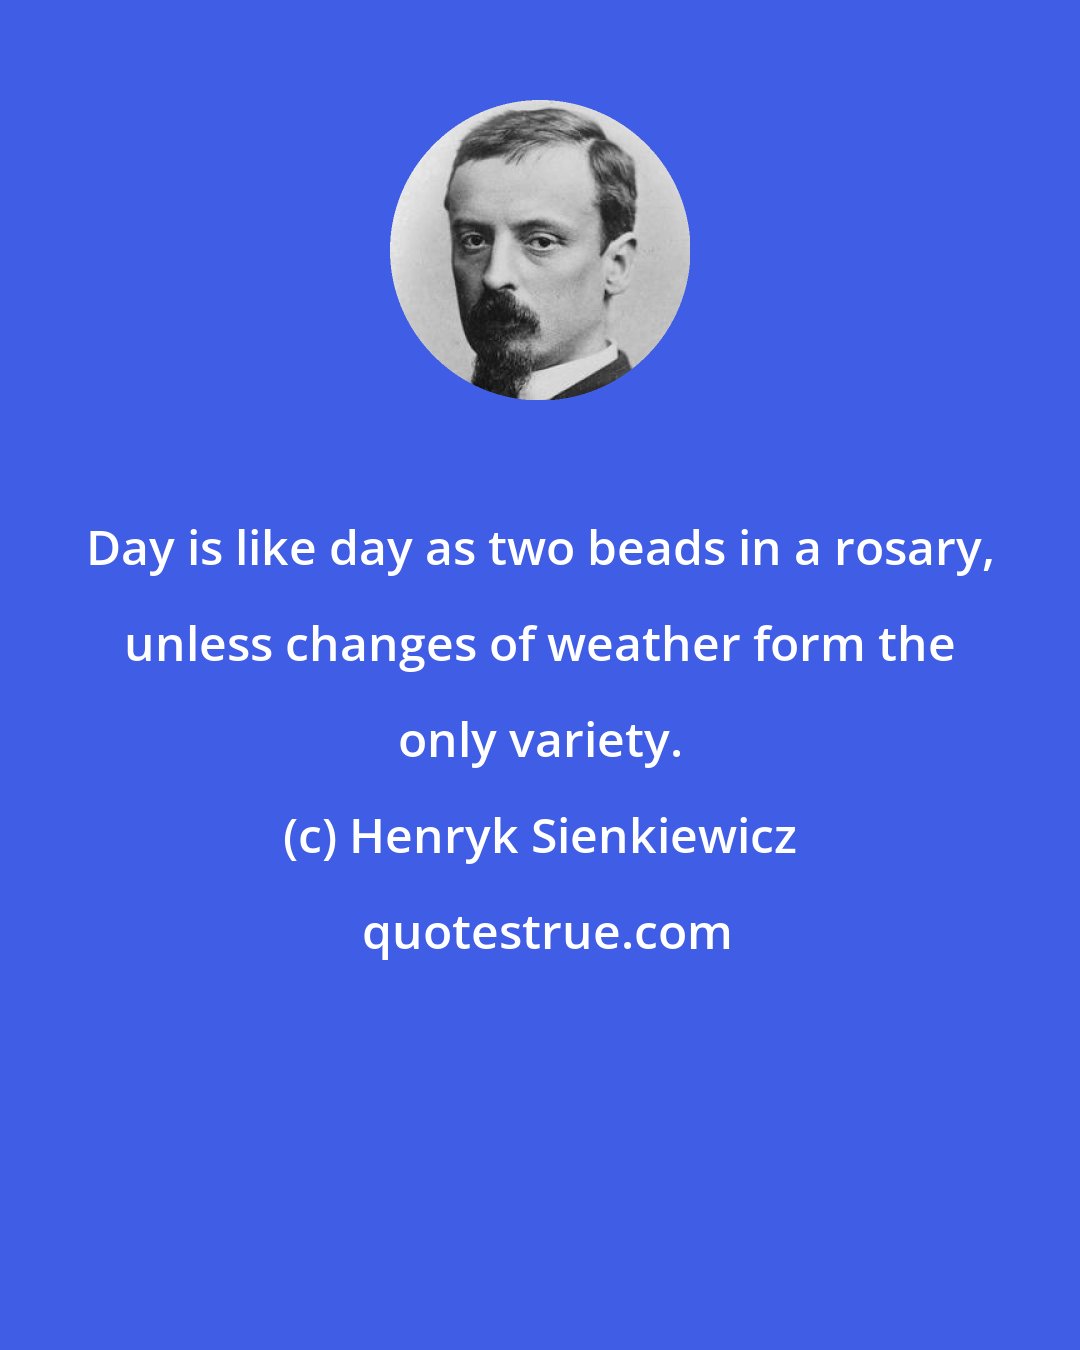 Henryk Sienkiewicz: Day is like day as two beads in a rosary, unless changes of weather form the only variety.